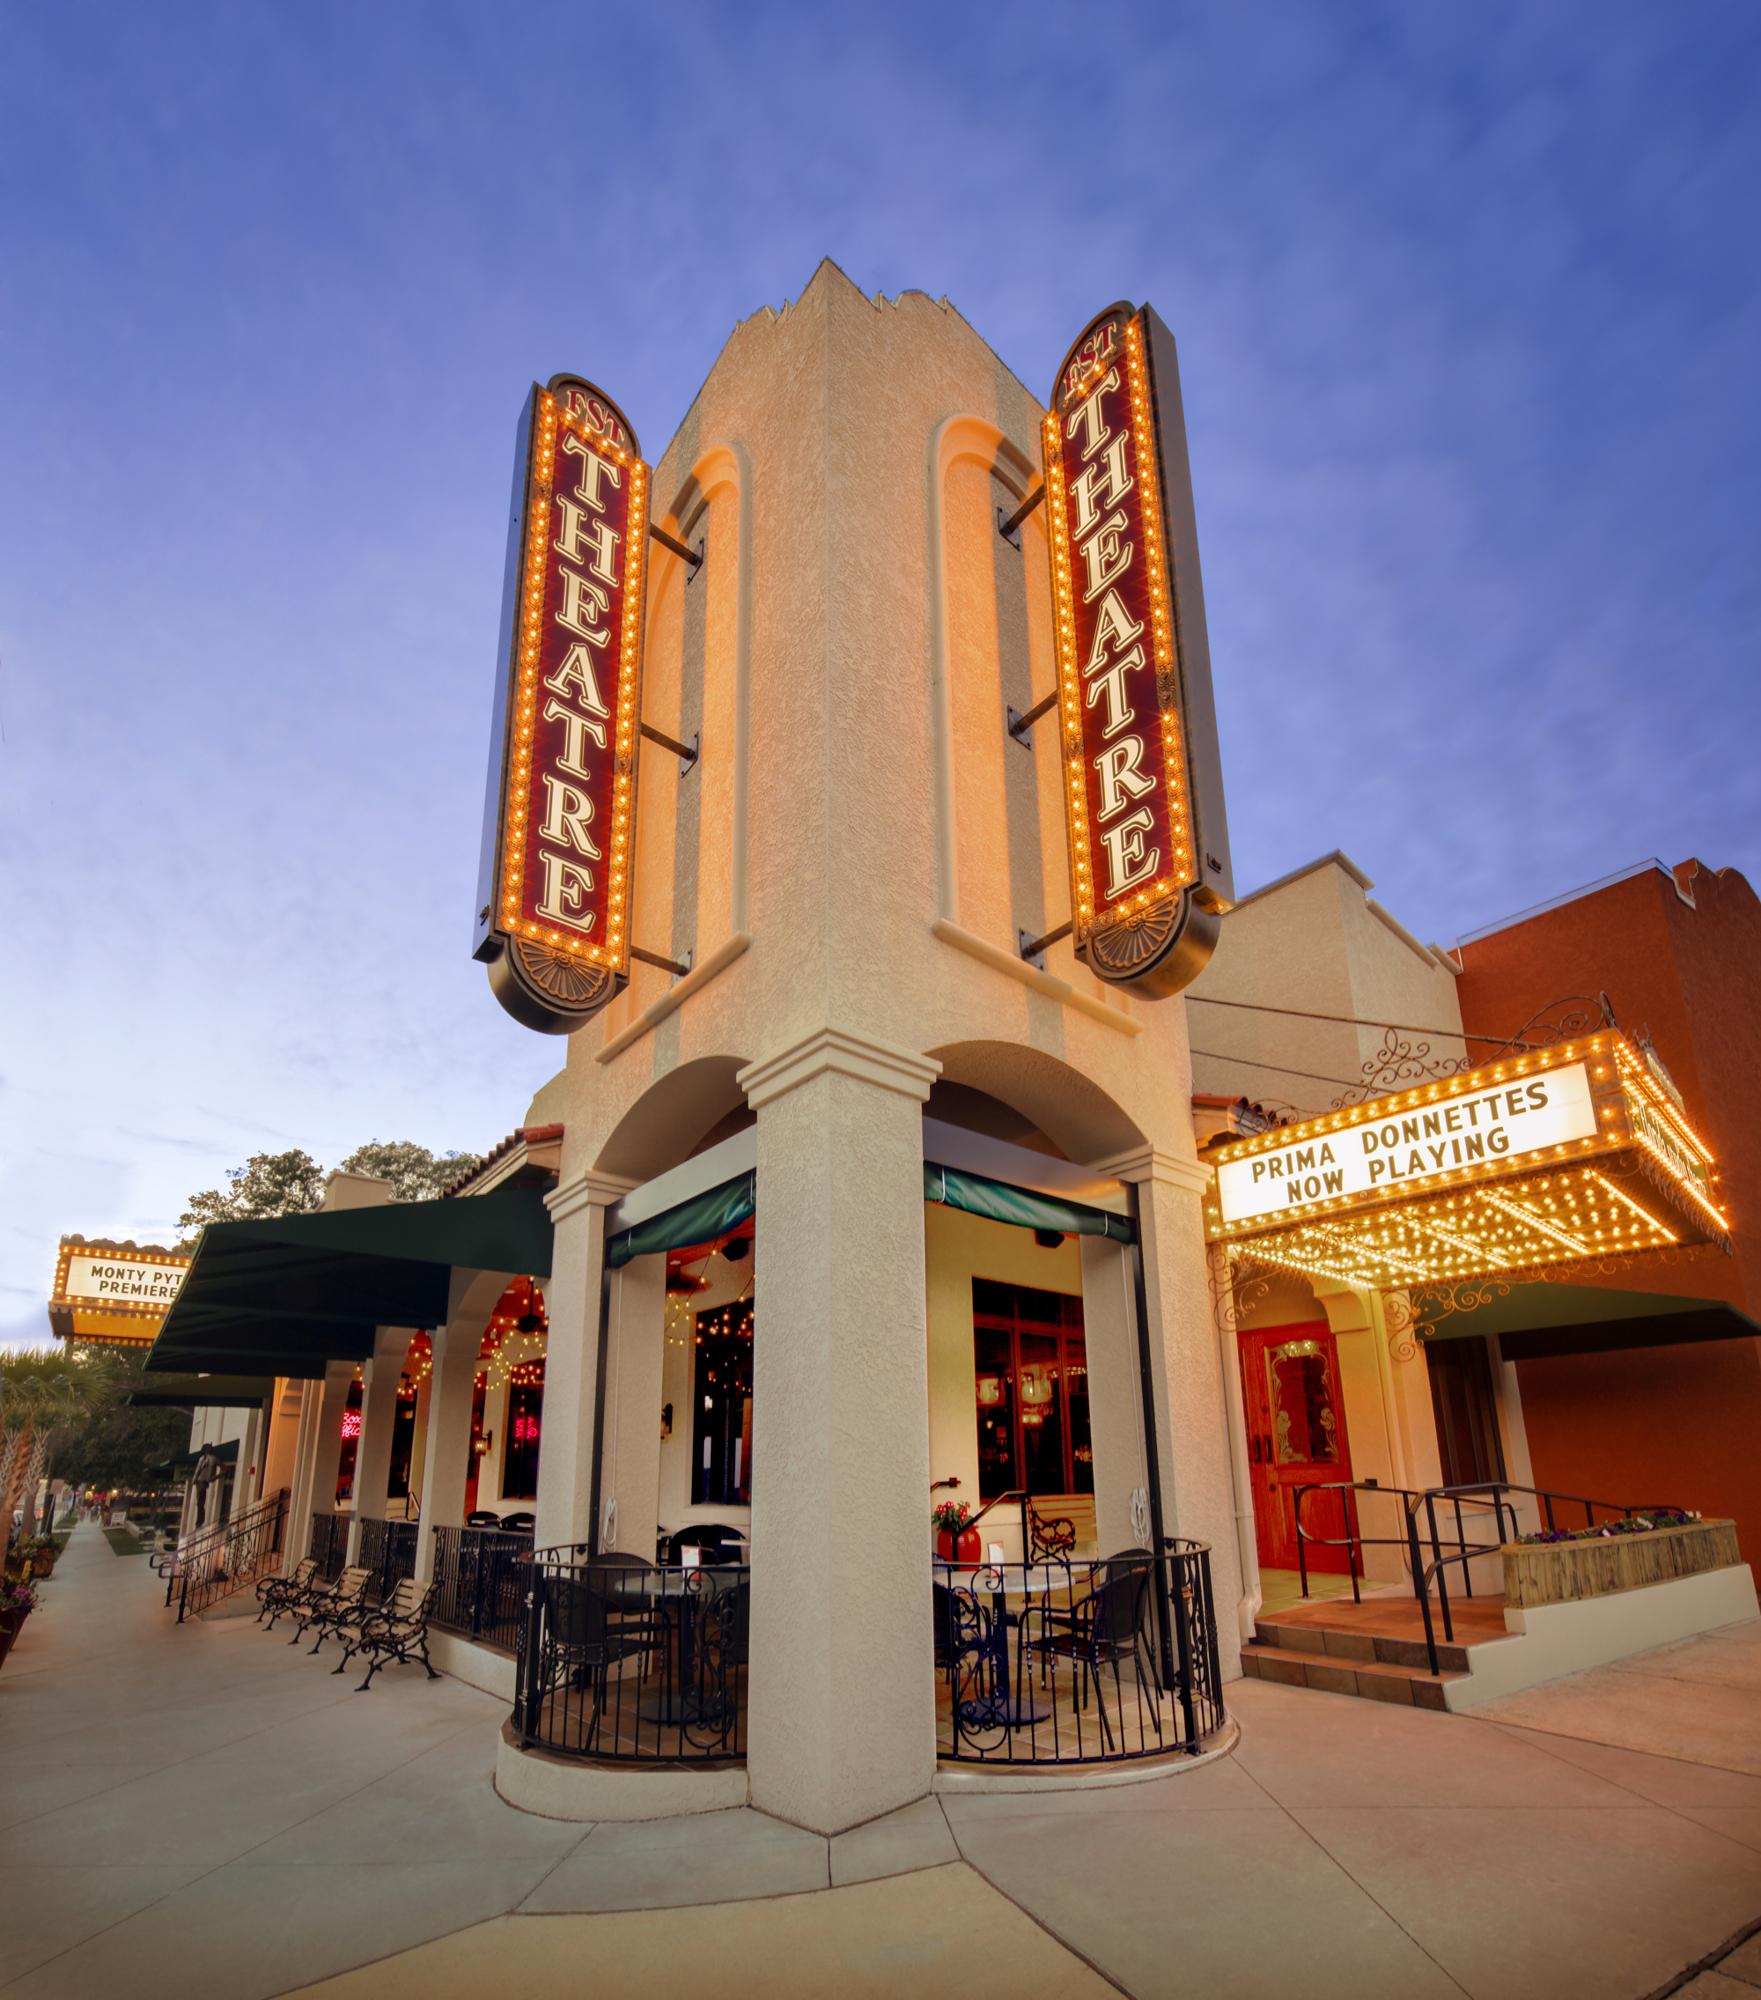 Florida Studio Theatre consists of five small theaters that present shows simultaneously.